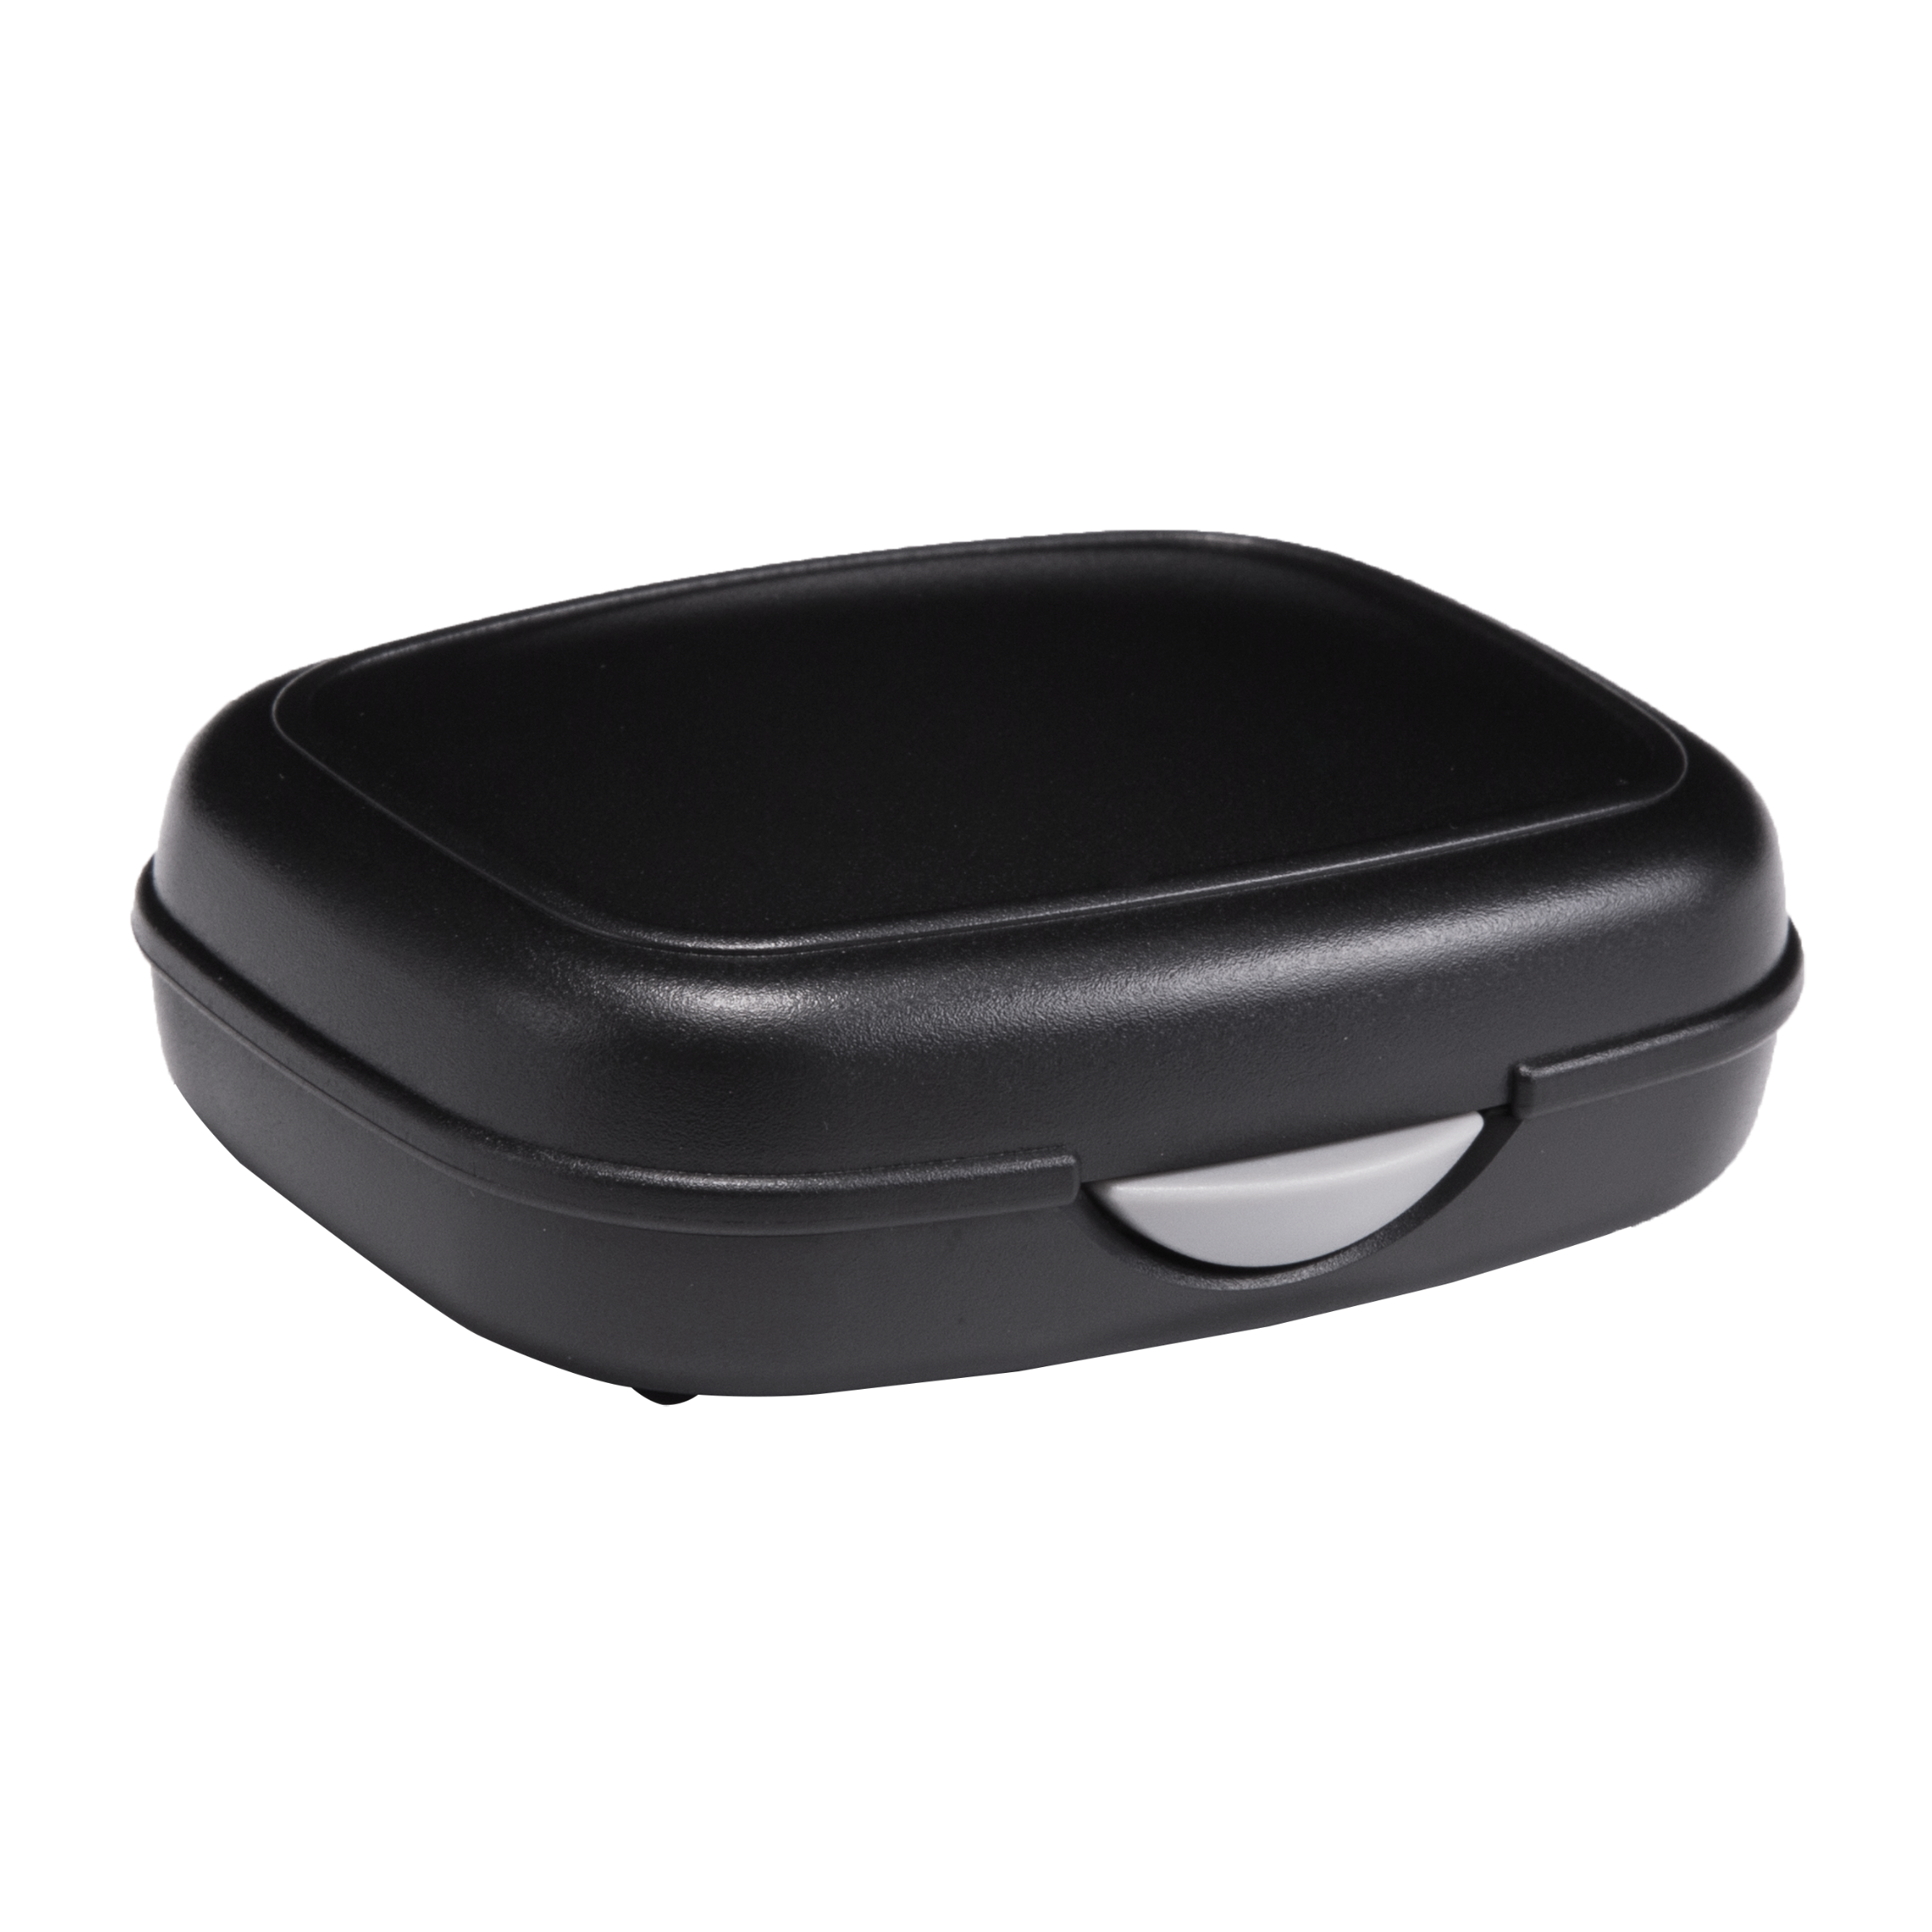 Soundlink Cheap Black BTE Hearing Aids Storage For Hearing Aids Clinic